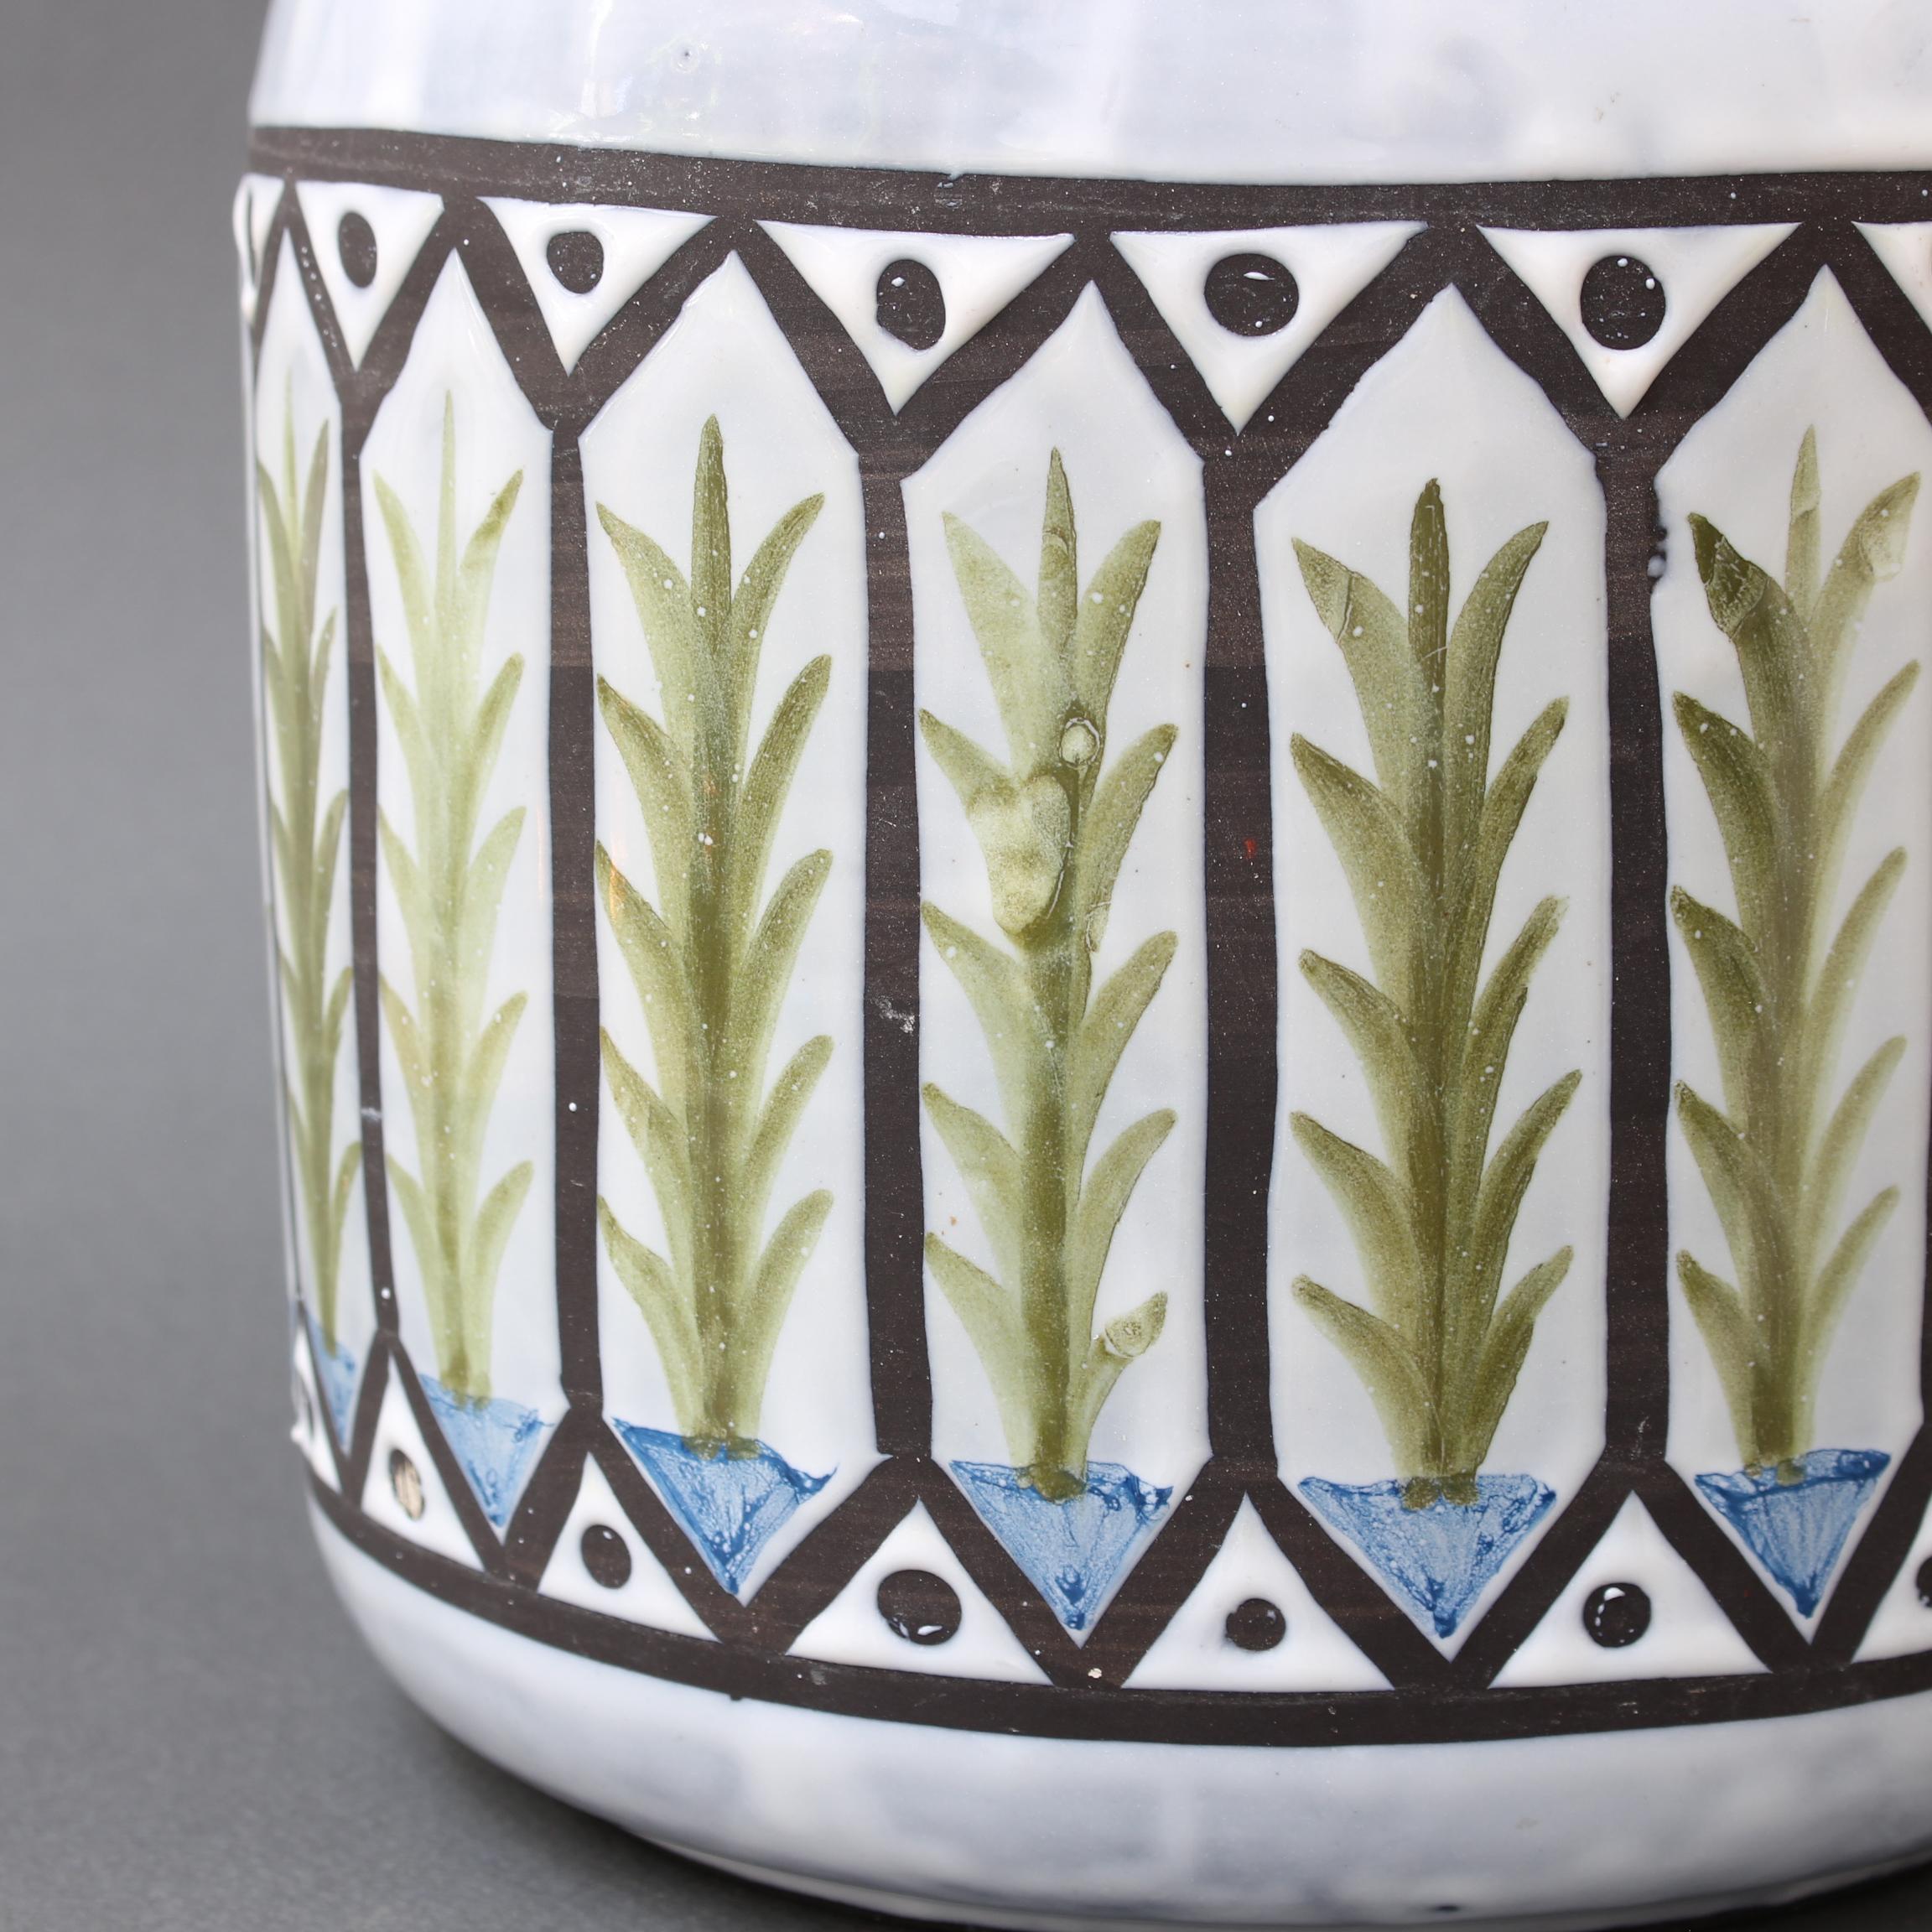 Vintage French Ceramic Cachepot by Roger Capron, 'circa 1970s' For Sale 3